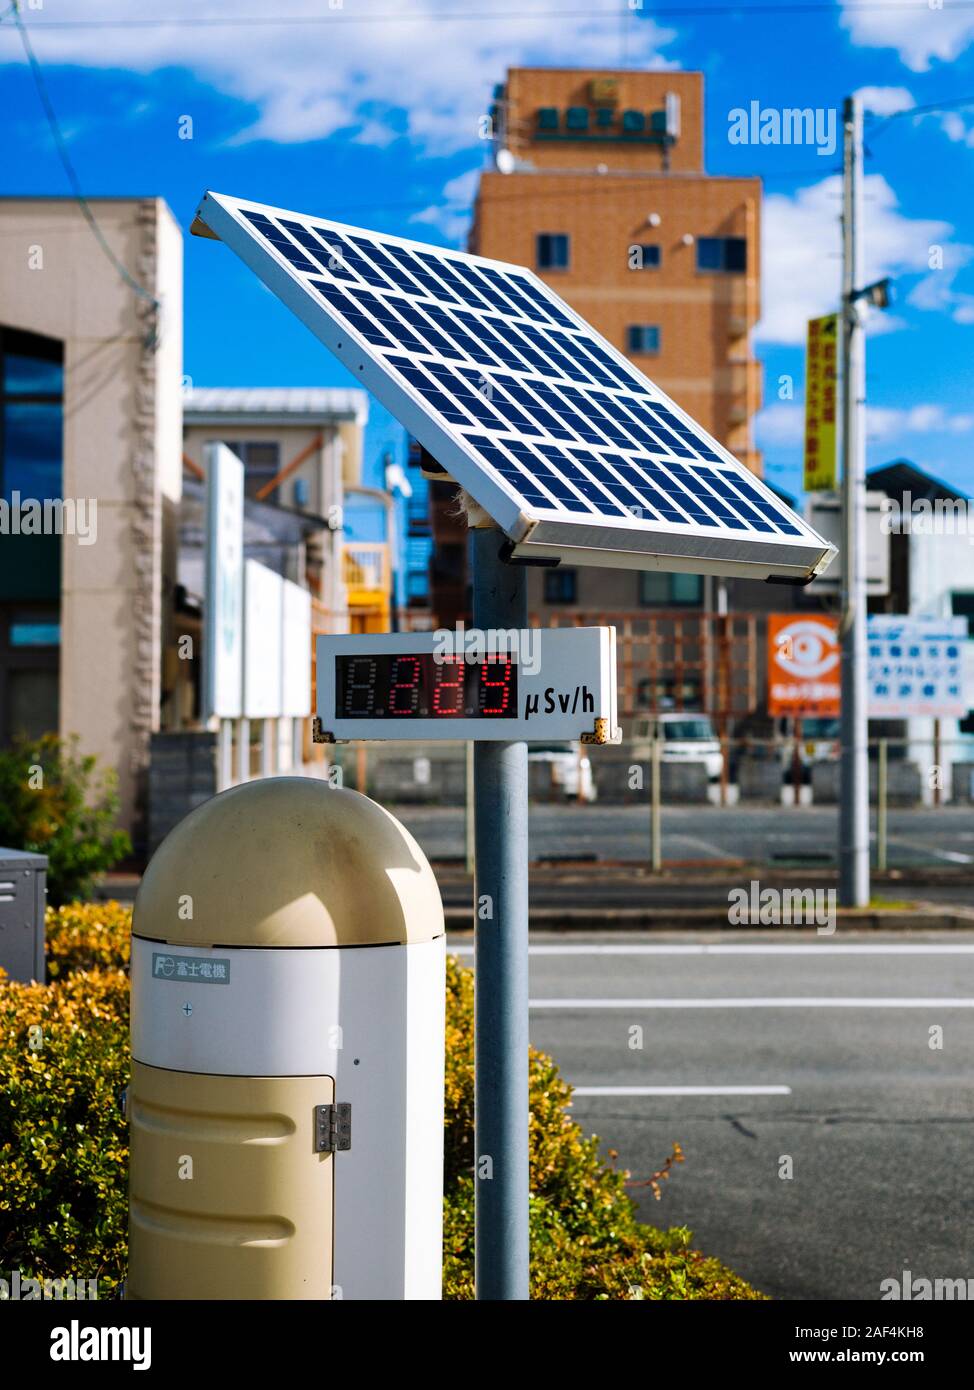 Public geiger counter in Namie City, Fukushima Prefecture, Japan. Following the nuclear disaster in 2011, the evacuation ban has been lifted in severa Stock Photo